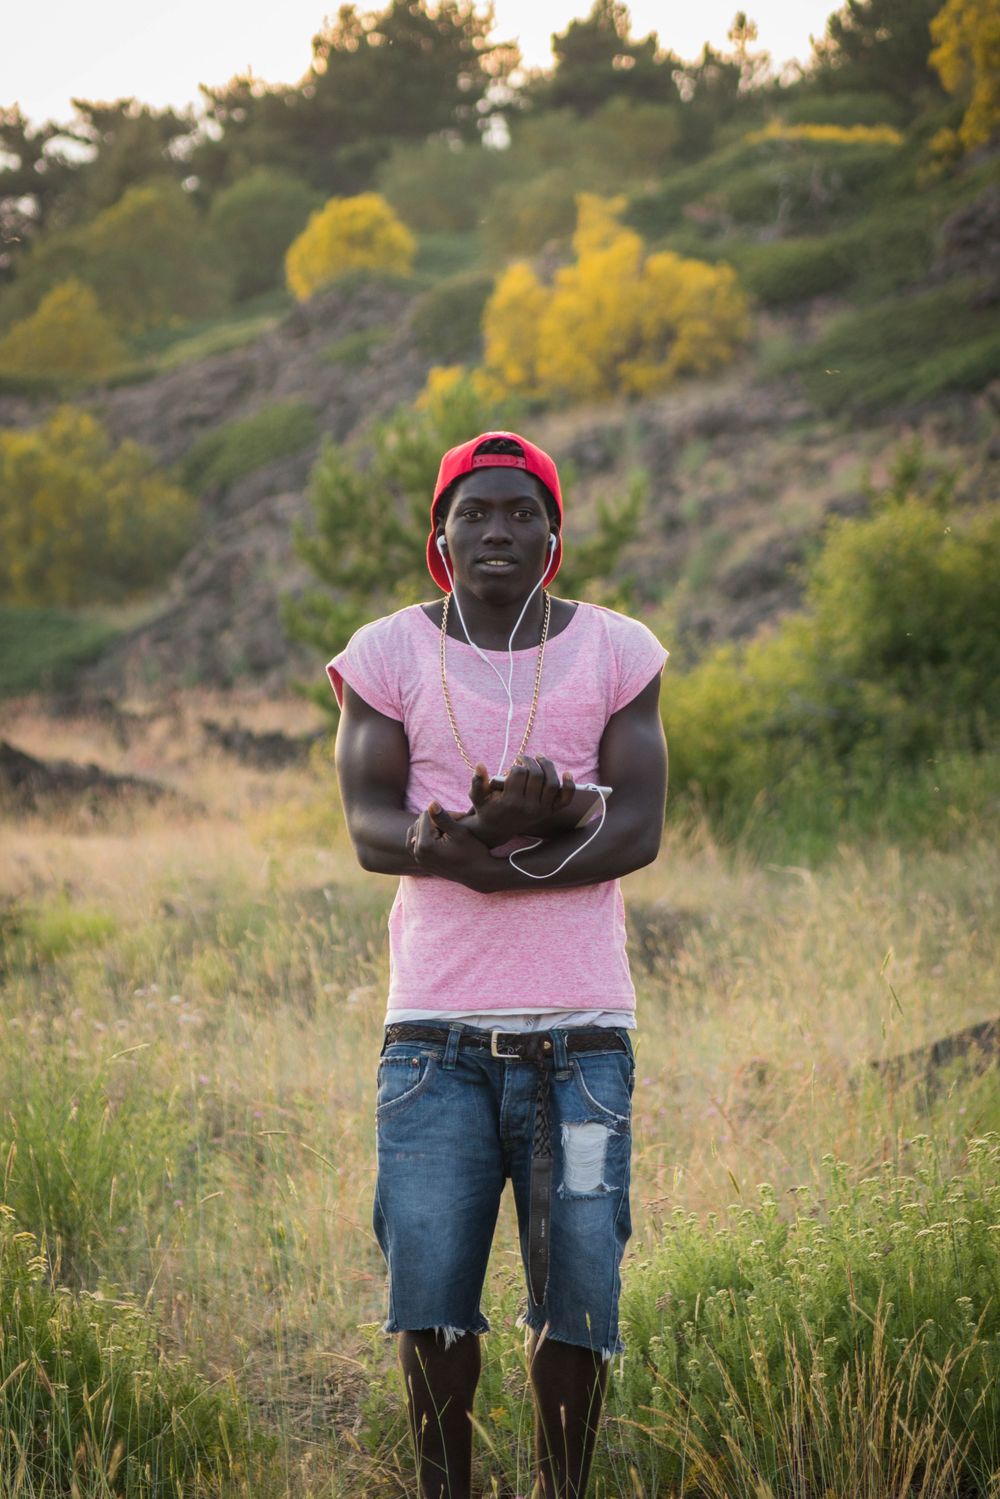 Sayou Fatti – July 2017, Mount Etna, Sicily. Sayou, an 18-year-old Gambian, listens to music on his phone in the highlands of Mount Etna before performing a concert at an NGO retreat.